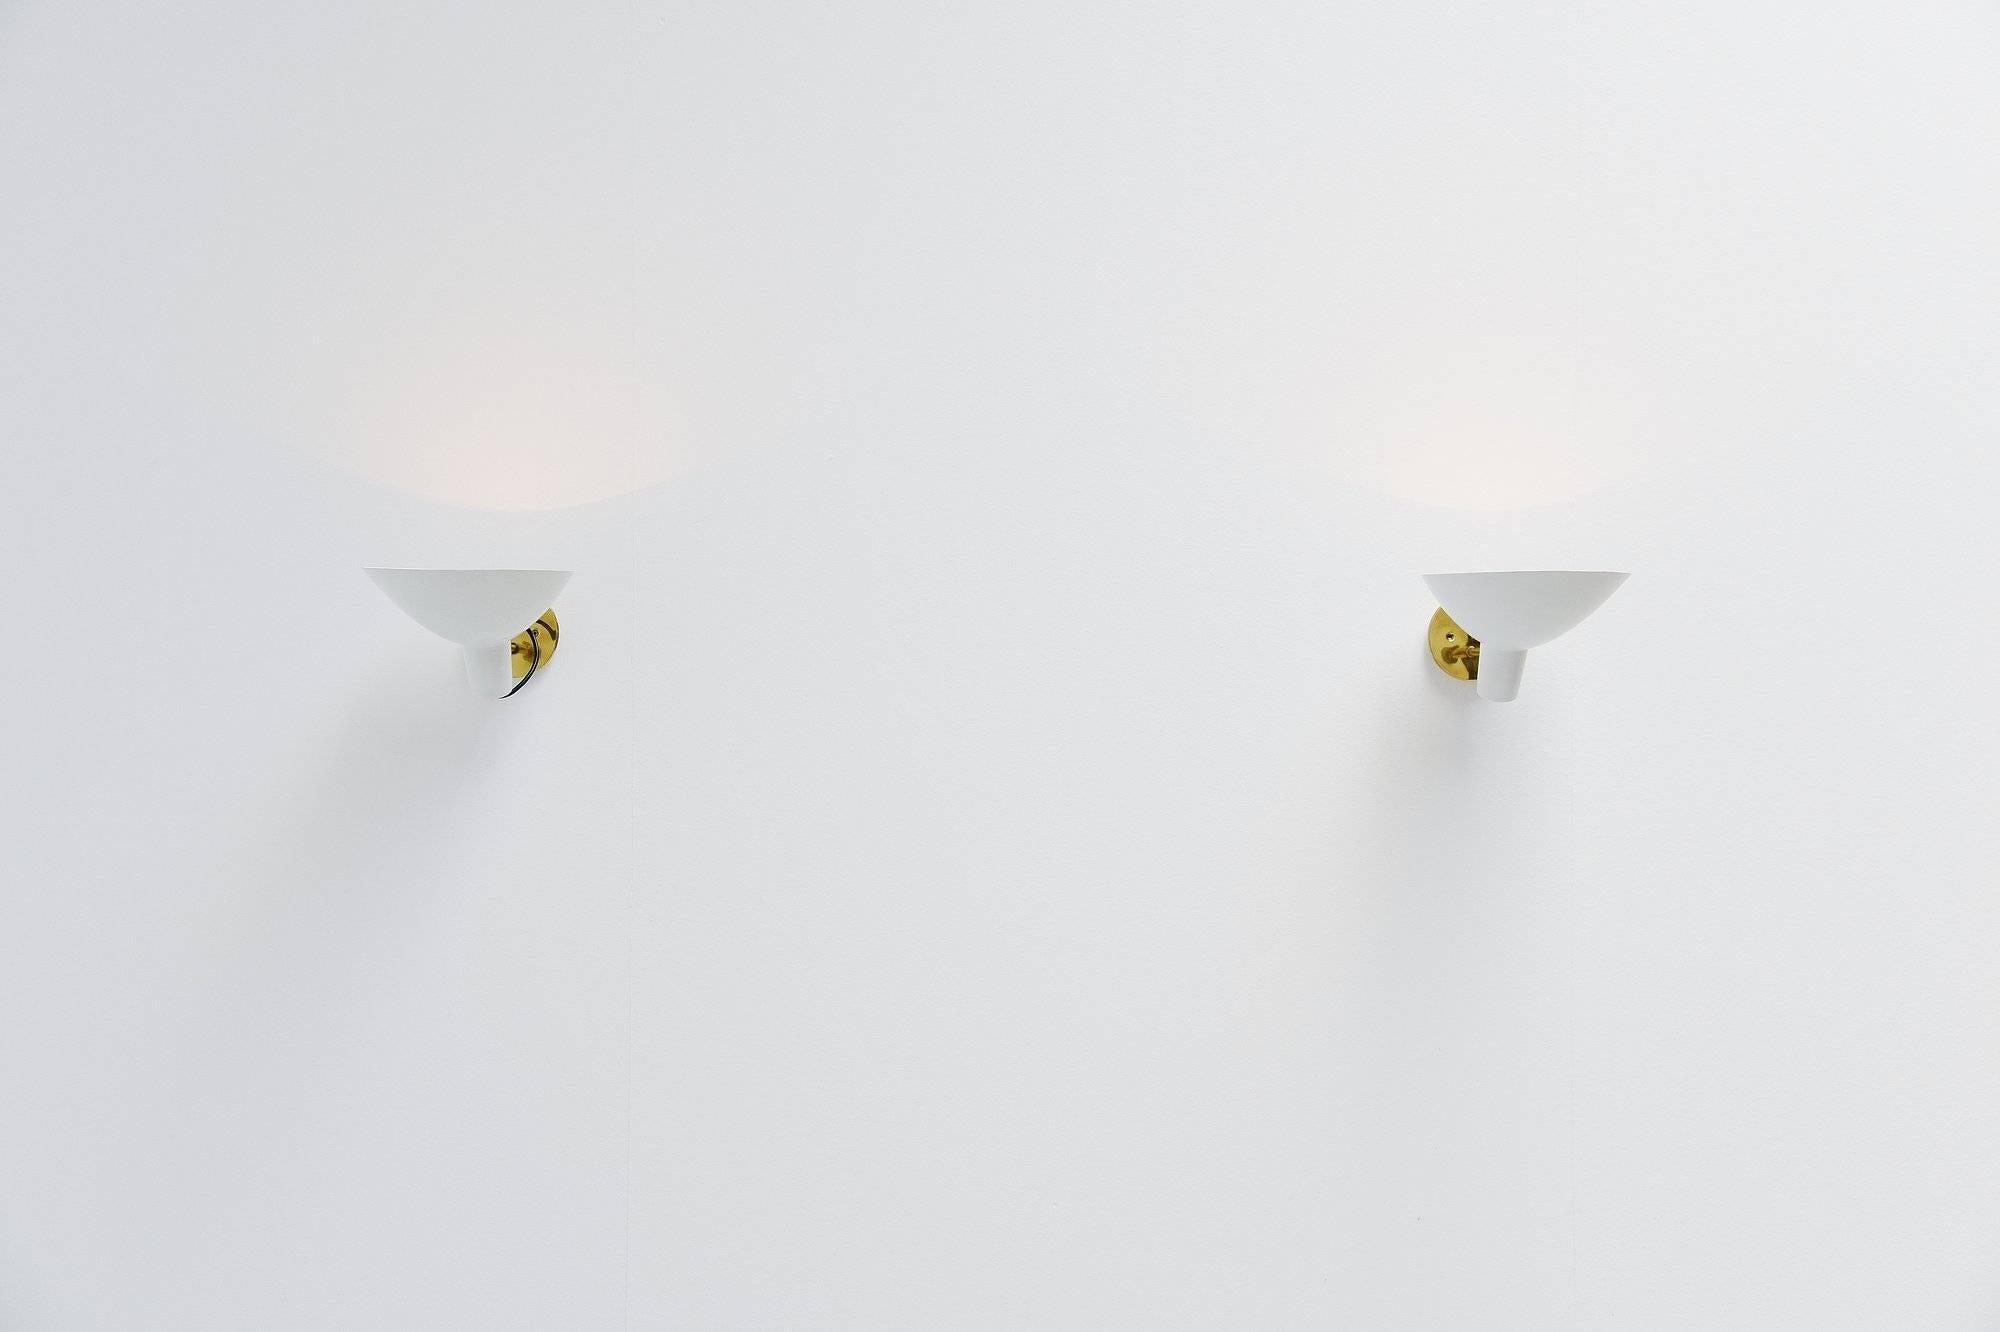 Cold-Painted Vittoriano Vigano Sconces Model 2 Arteluce, Italy, 1950 For Sale